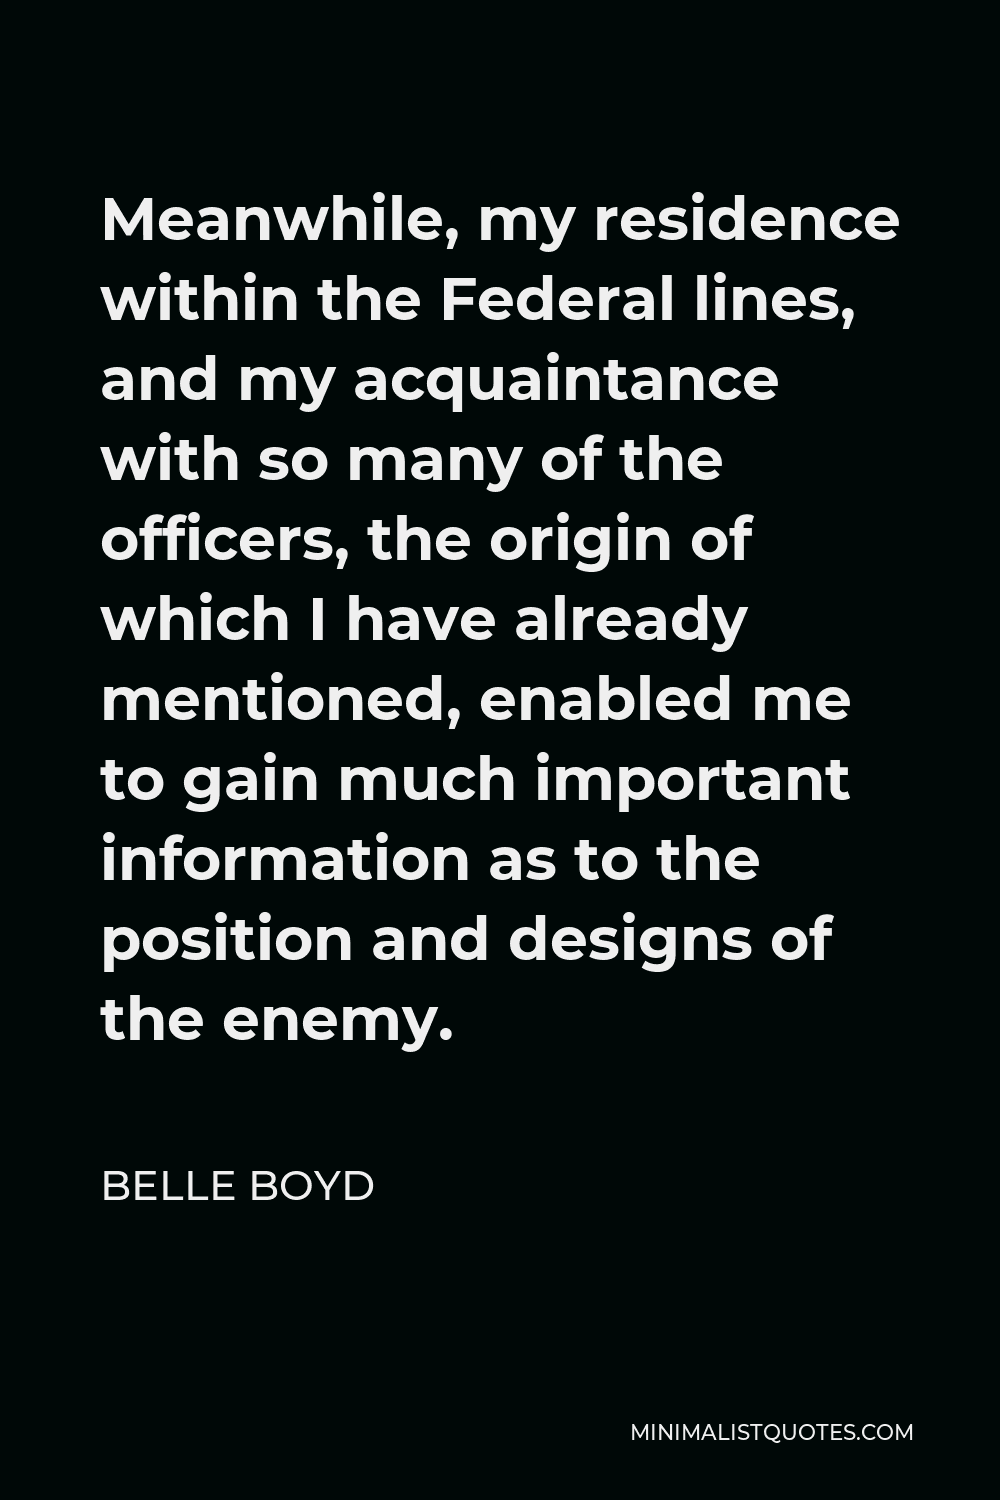 Belle Boyd Quote - Meanwhile, my residence within the Federal lines, and my acquaintance with so many of the officers, the origin of which I have already mentioned, enabled me to gain much important information as to the position and designs of the enemy.